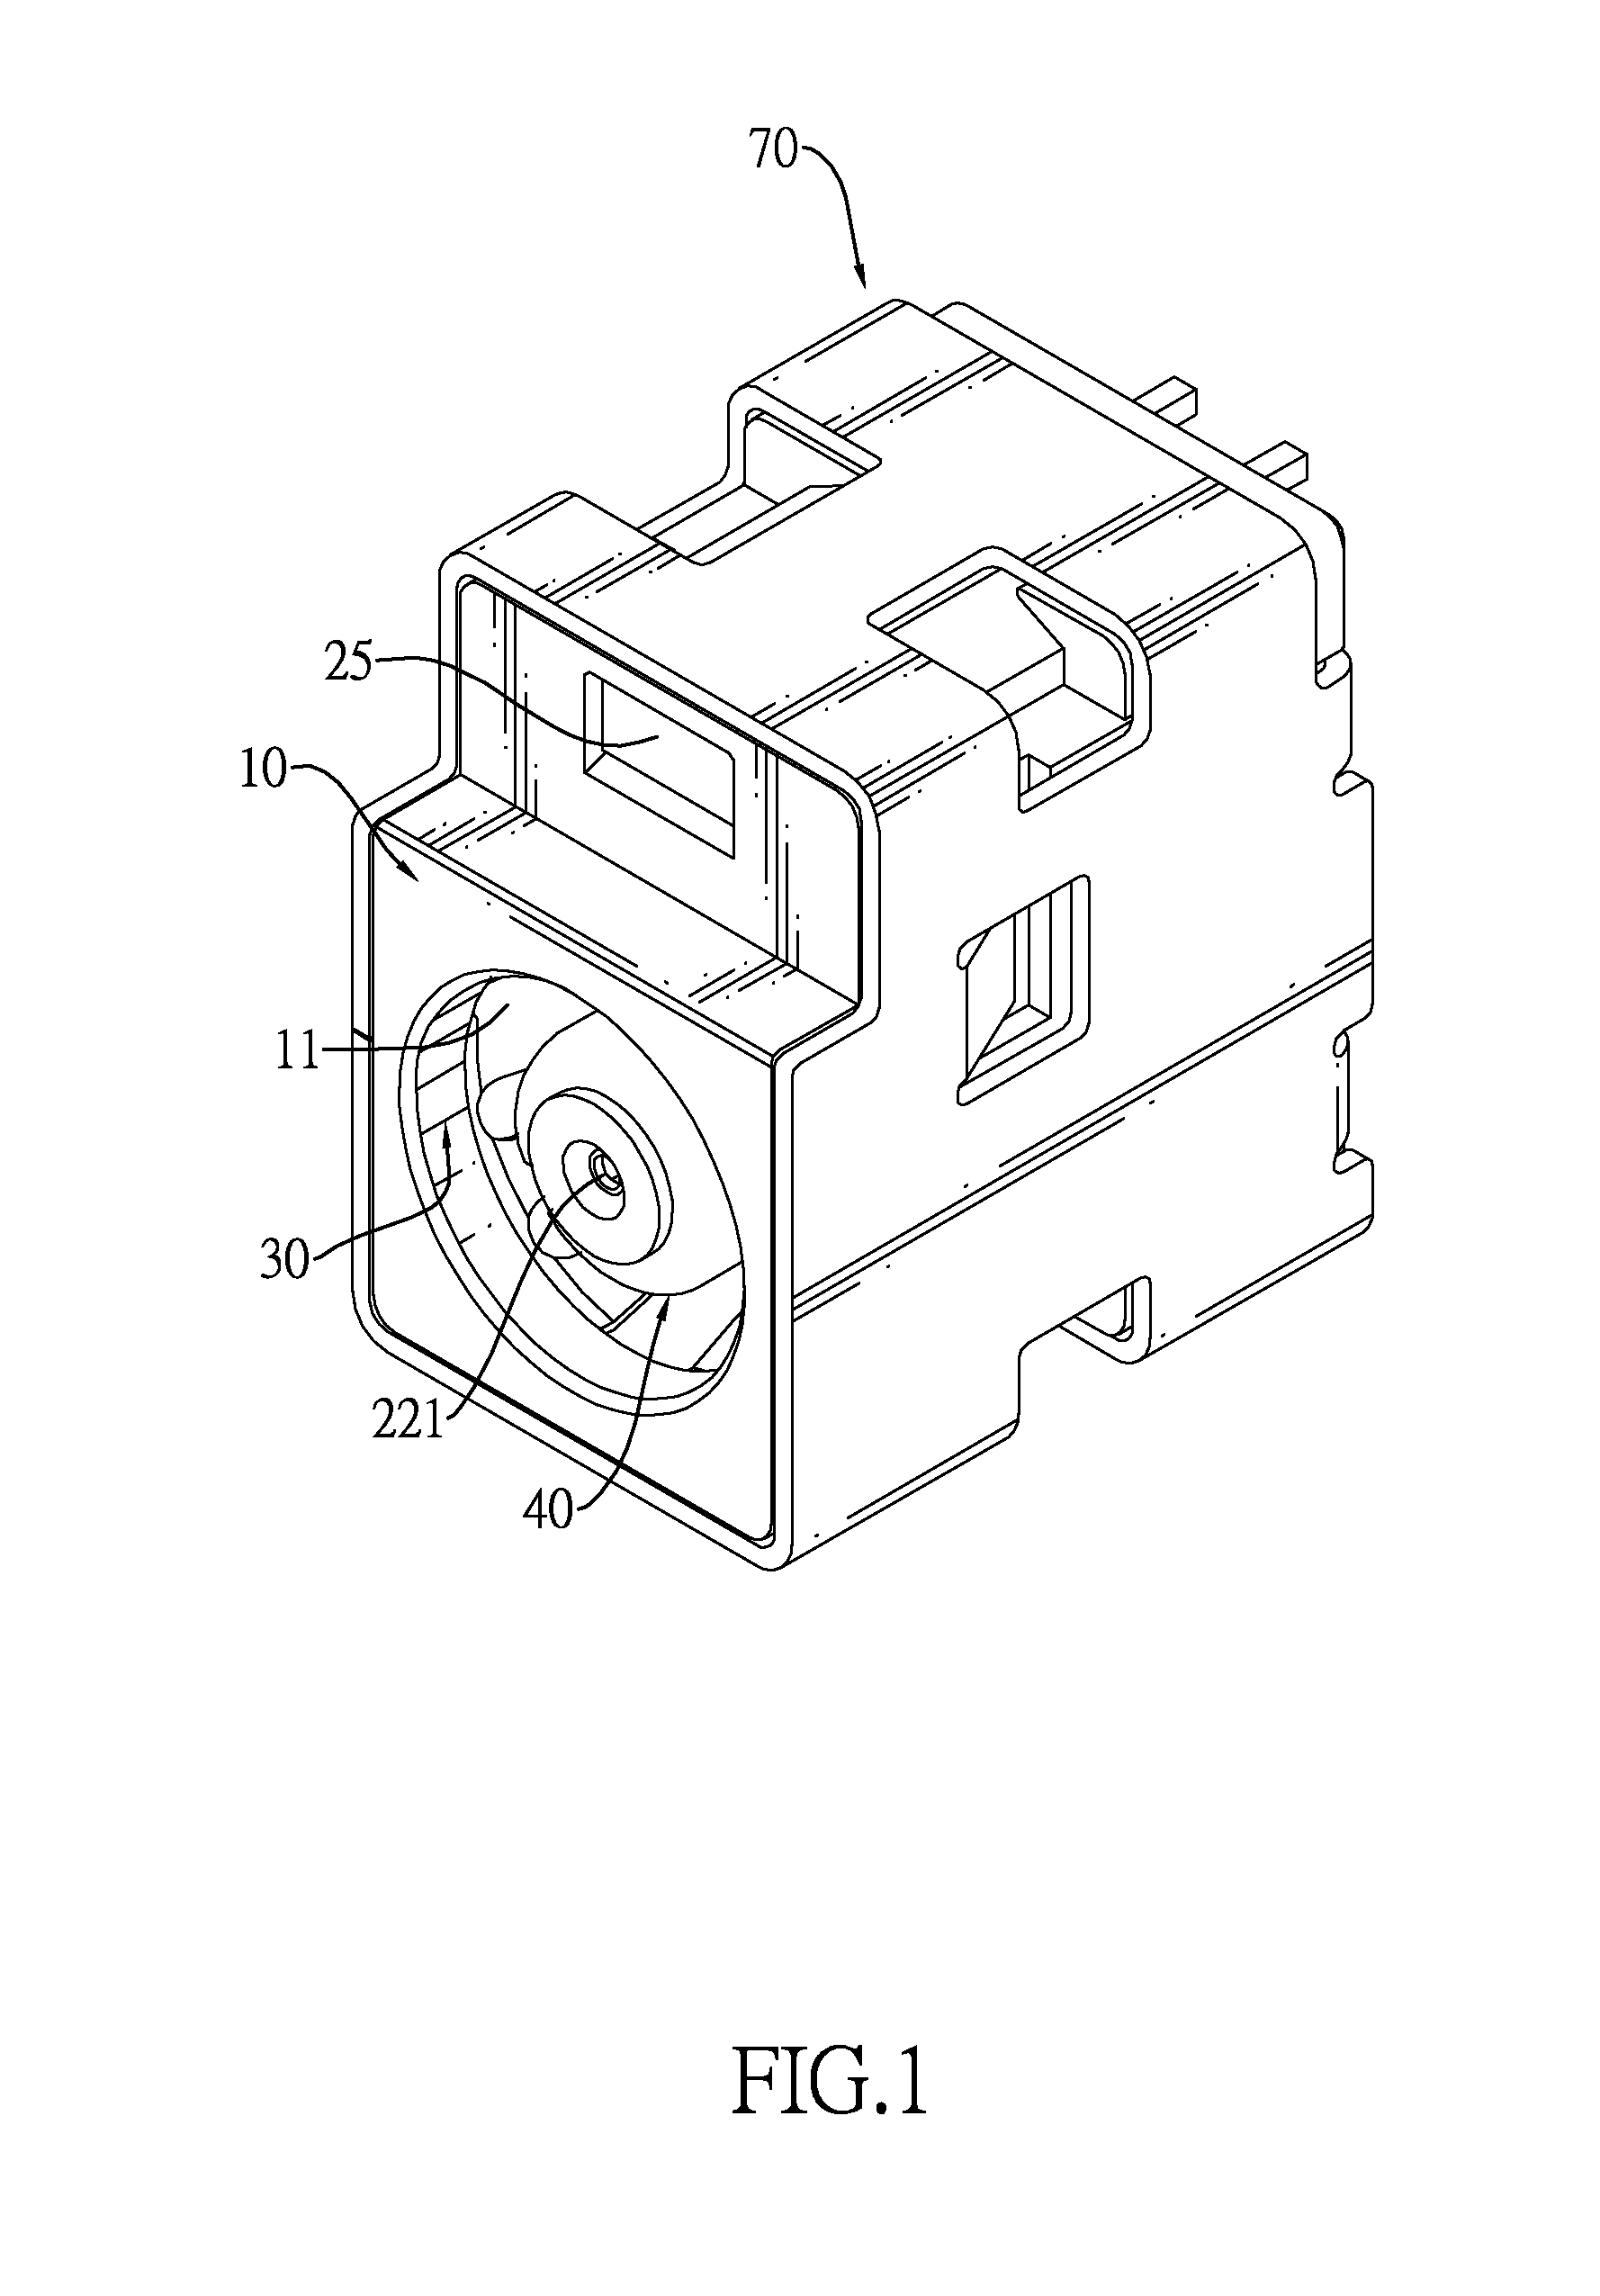 High power receptacle connector